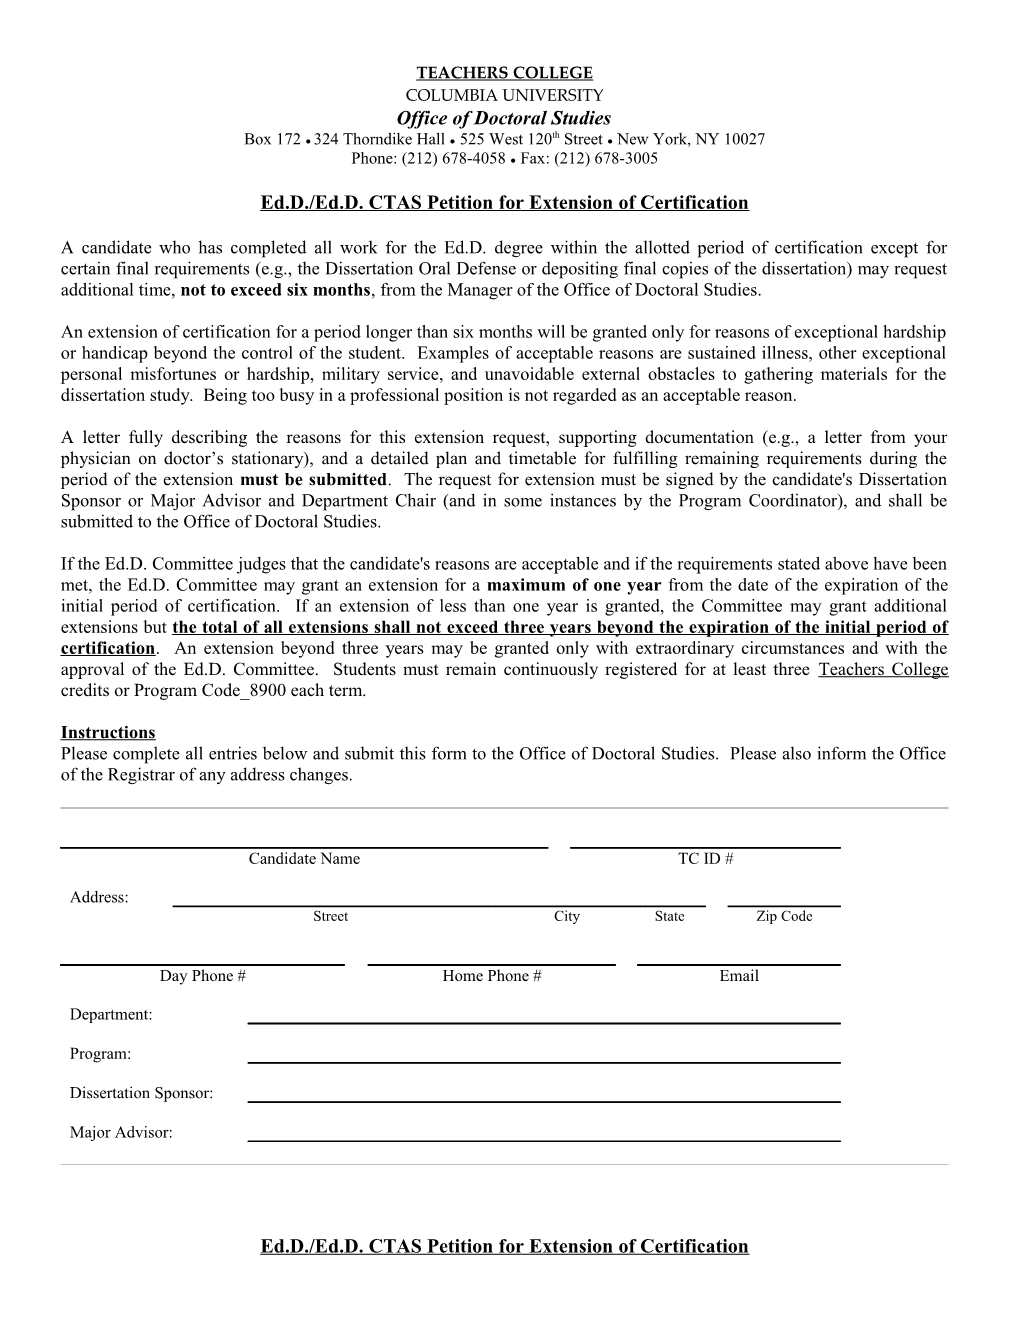 Ed.D./Ed.D. CTAS Petition for Extension of Certification